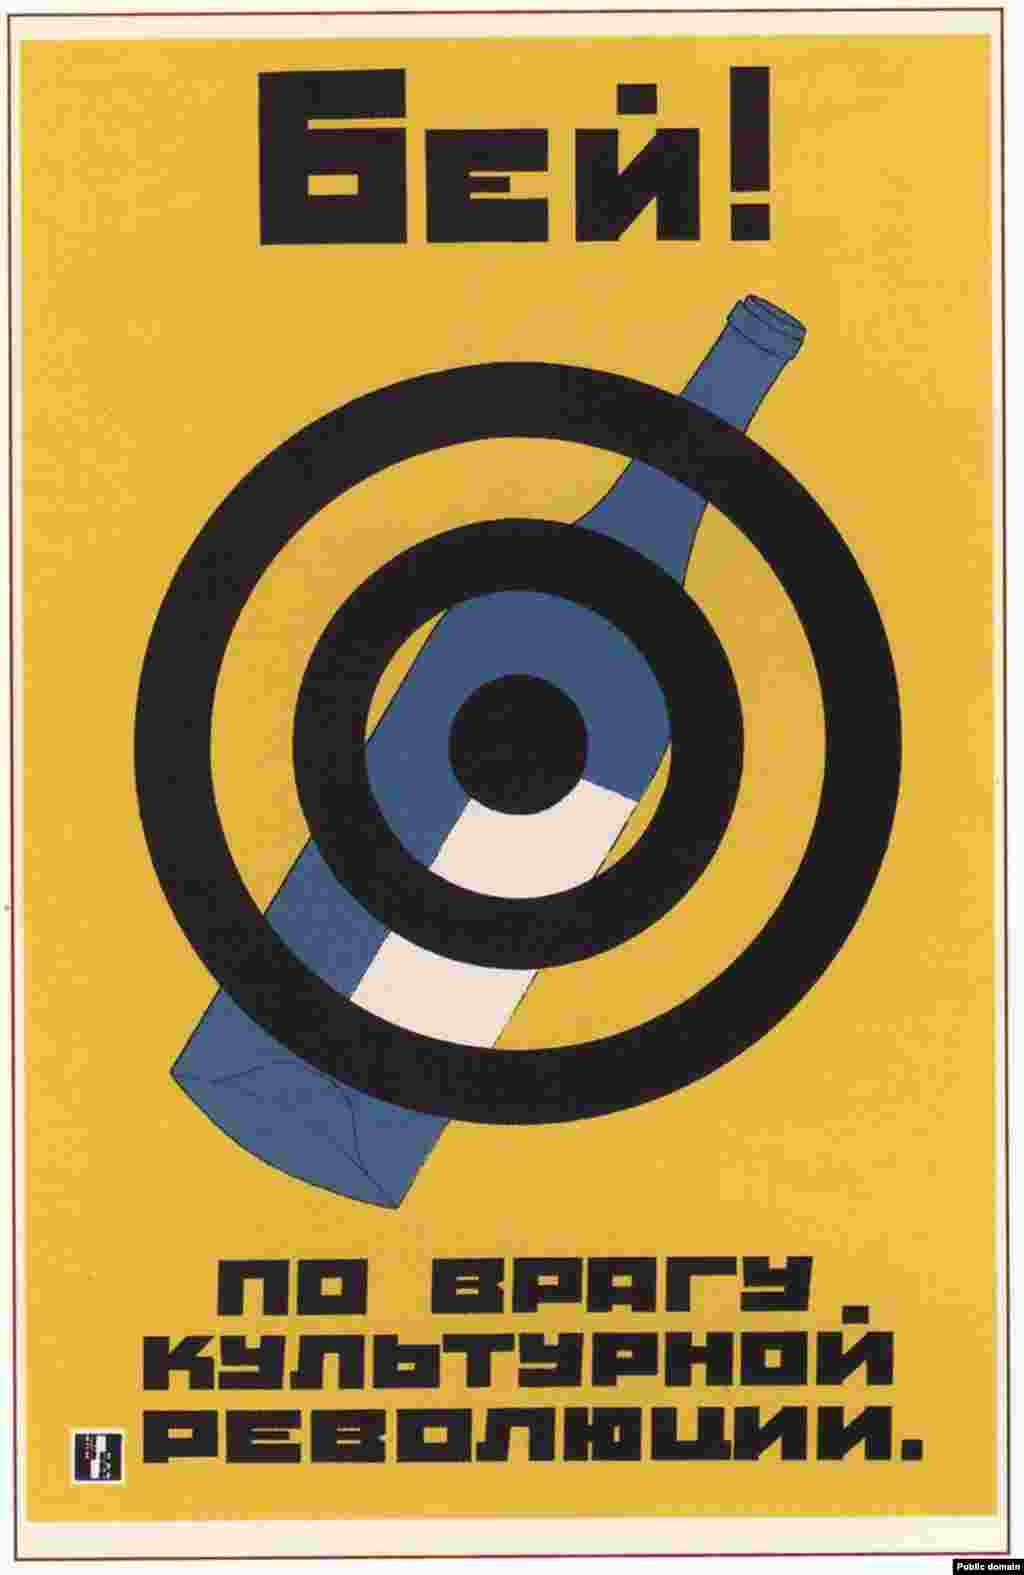 A Soviet anti-alcohol poster from 1930. The text exhorts people to &quot;smash&quot; alcohol, describing it as &quot;the enemy of the cultural revolution.&quot;